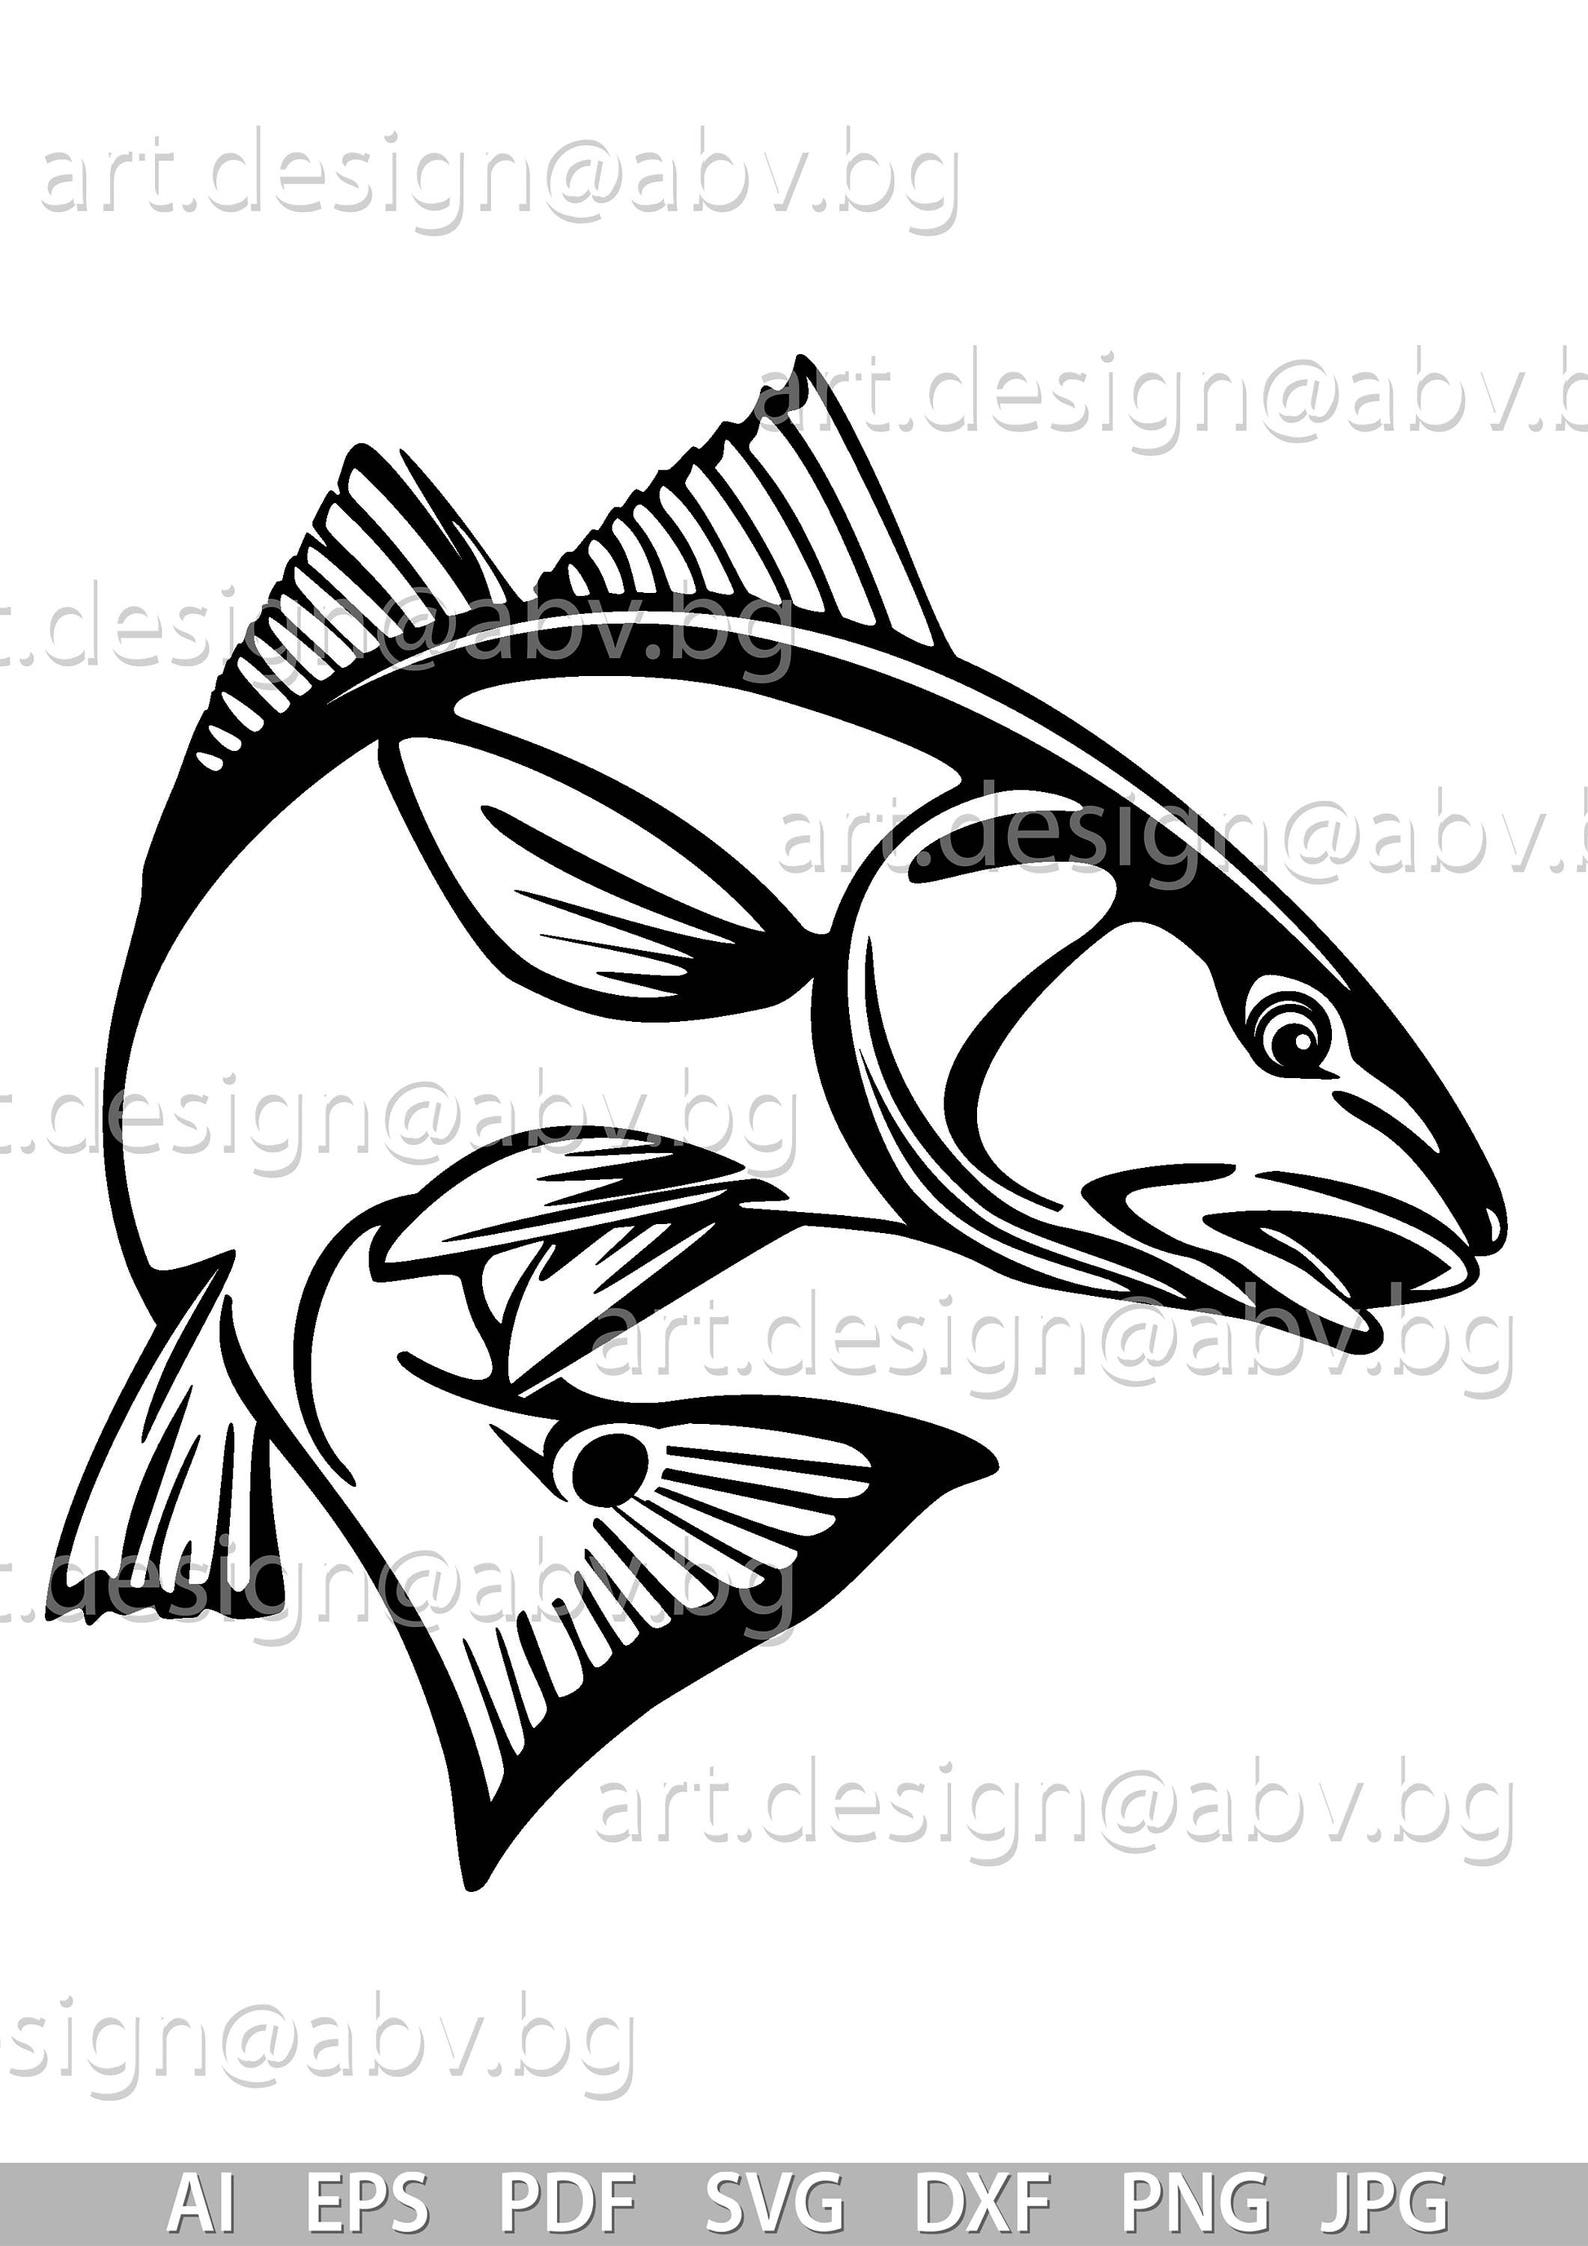 Vector RED FISH ai eps pdf png svg dxf jpg Image | Etsy